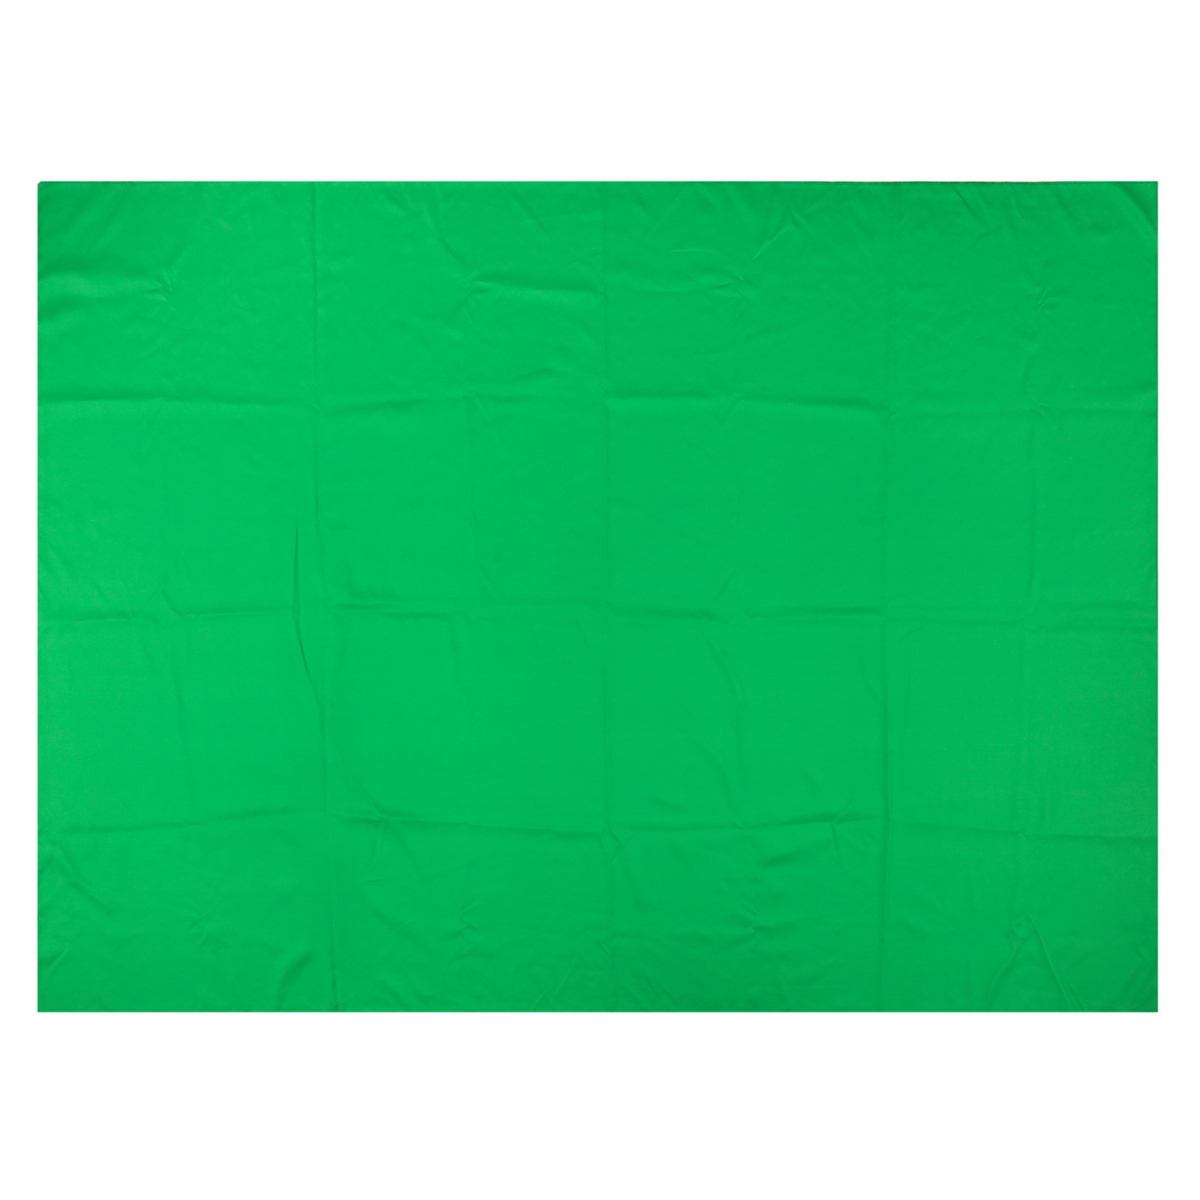 Find 7x5FT Green Photography Backdrop Background Studio Photography Prop for Sale on Gipsybee.com with cryptocurrencies